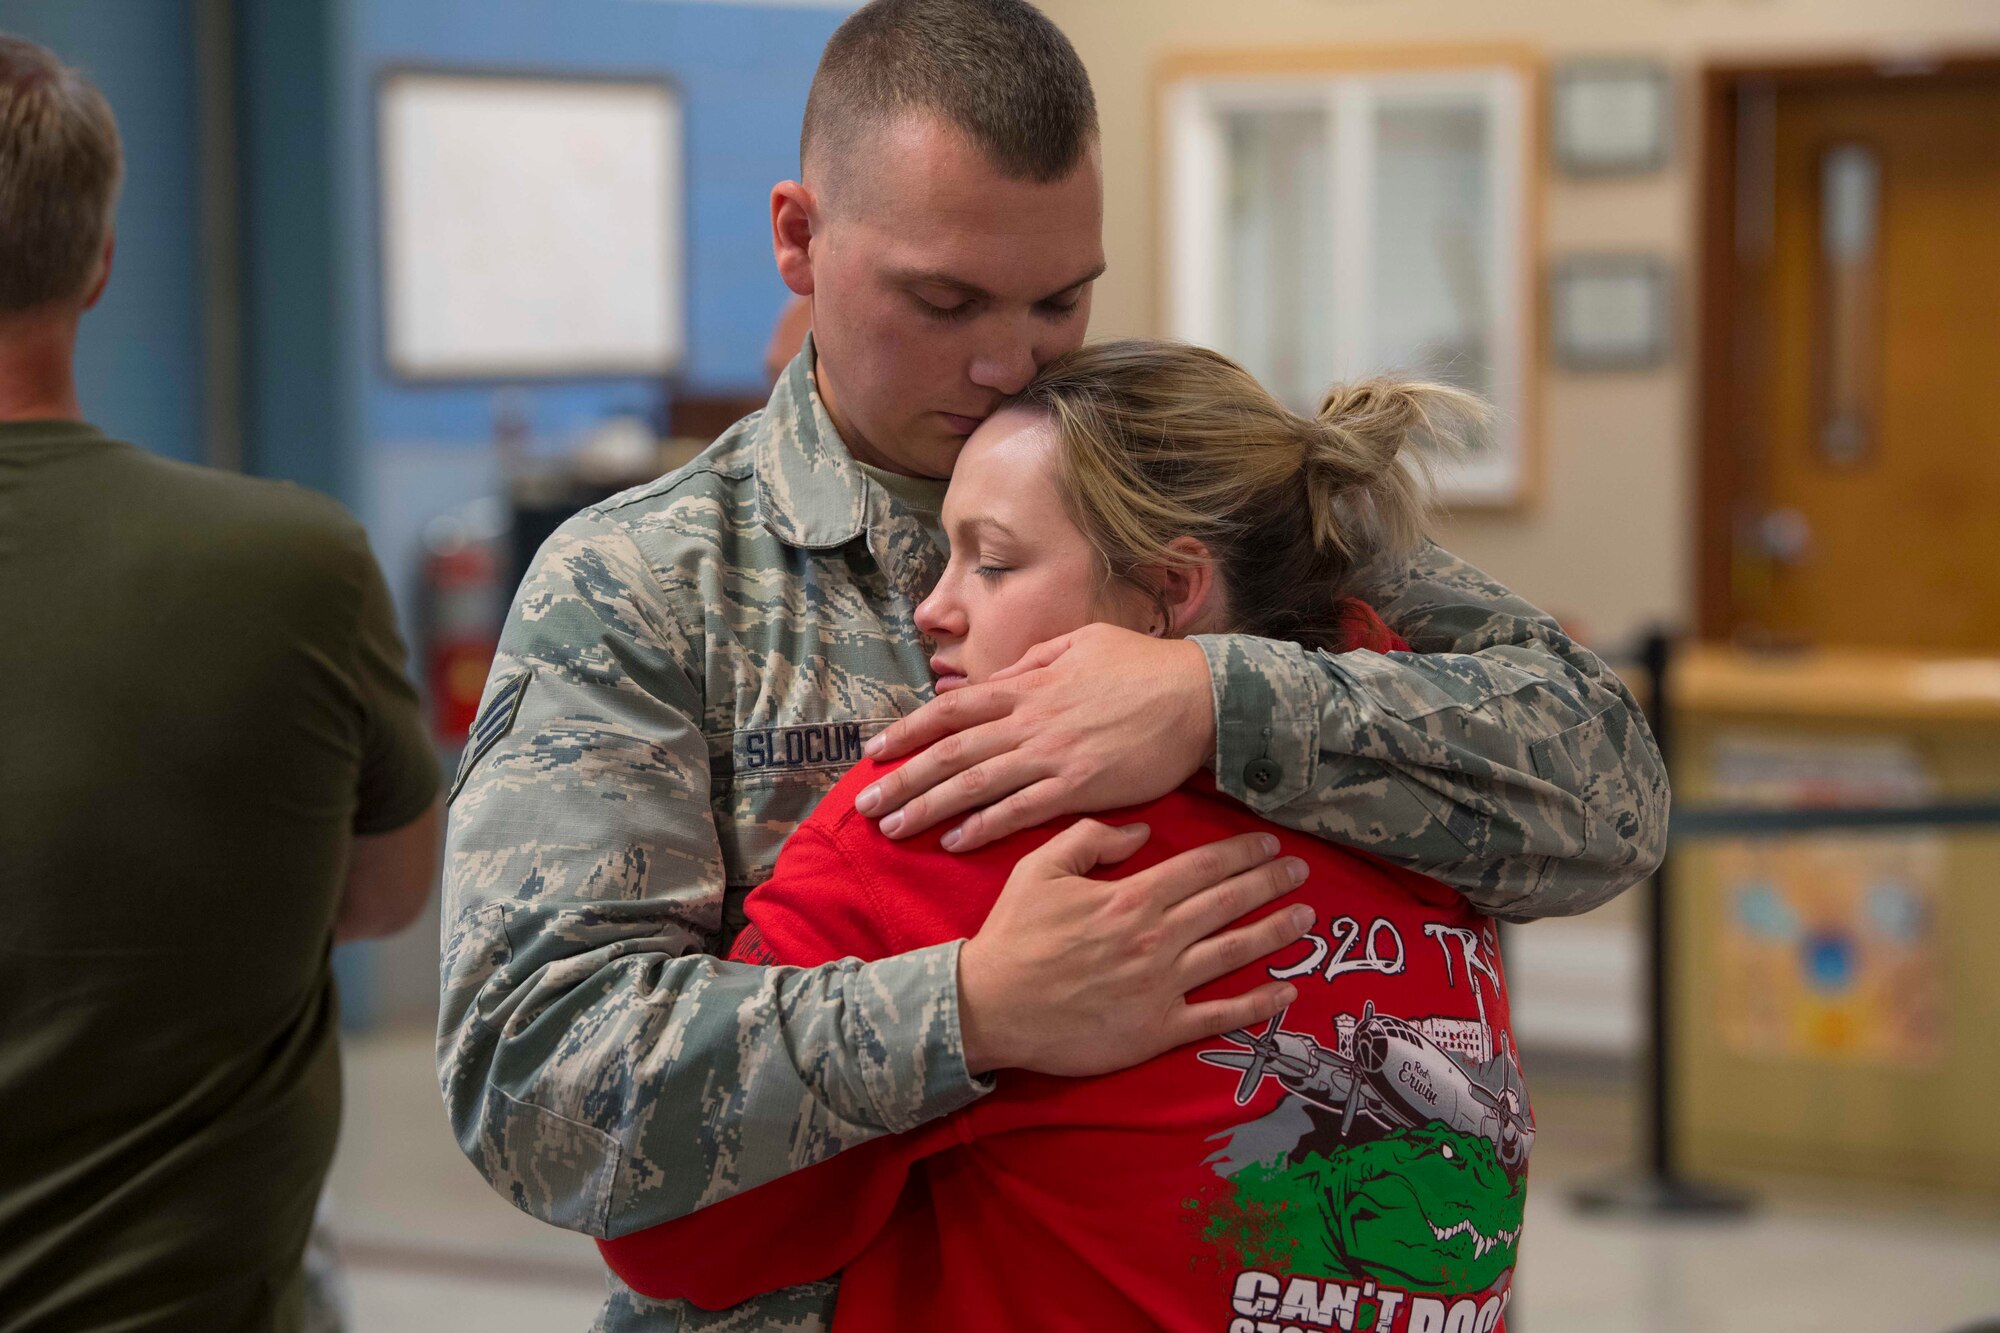 Senior Airman Nathan Slocum says his final goodbyes to a family member before deploying in support of Operation Freedom’s Sentinel June 27, 2017. Slocum is a crew chief with the 130th Aircraft Maintenance Squadron, McLaughlin Air National Guard Base, Charleston, W.Va. (U.S. Air National Guard photo by Staff Sgt. Adam Juchniewicz)